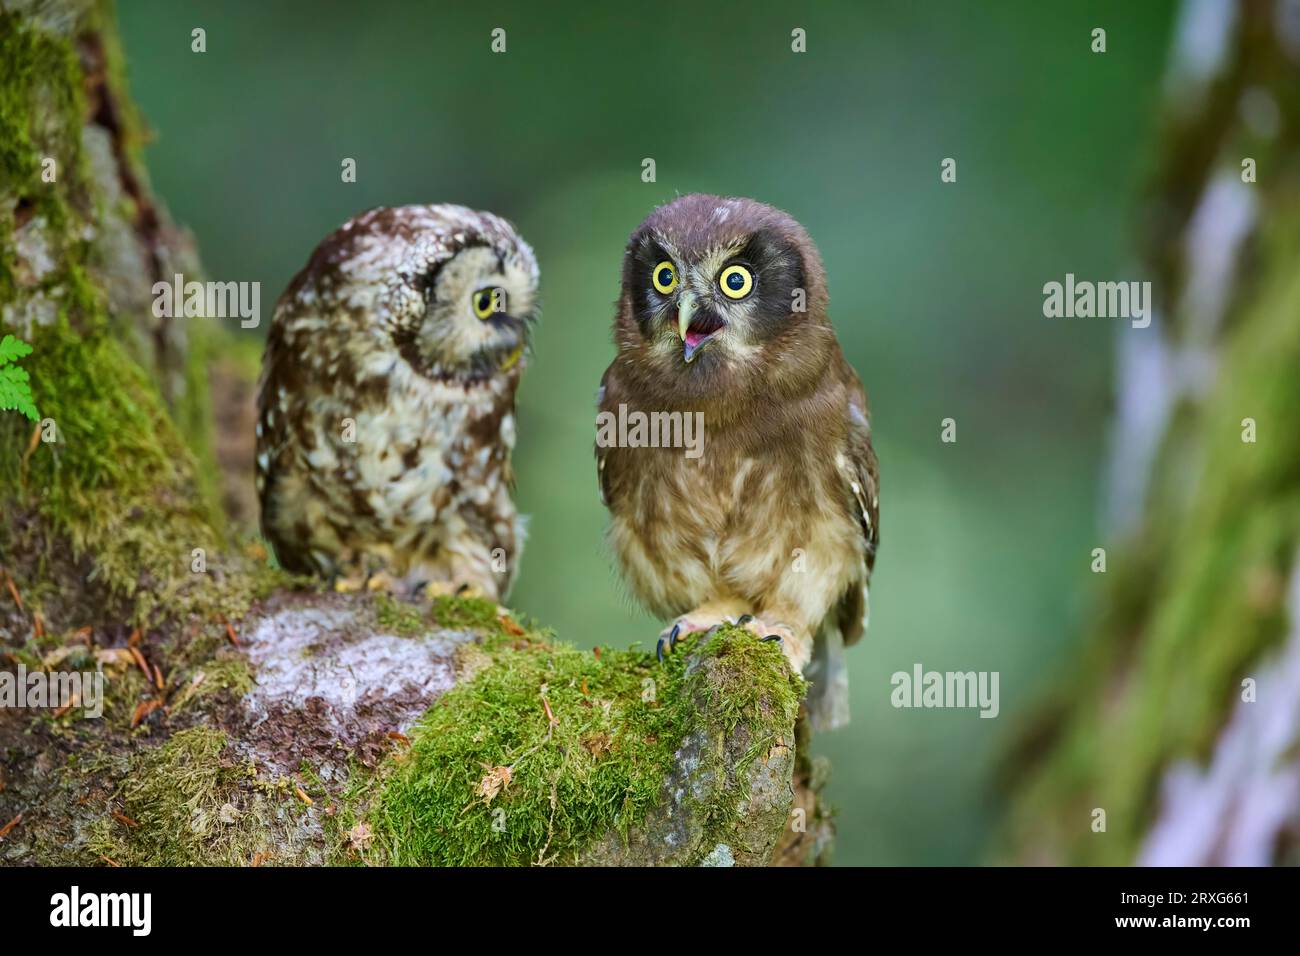 Tengmalm's Owl (Aegolius funereus), adult with young bird, sitting alertly on mossy tree young bird begging, Bohemian Forest, Czech Republic Stock Photo